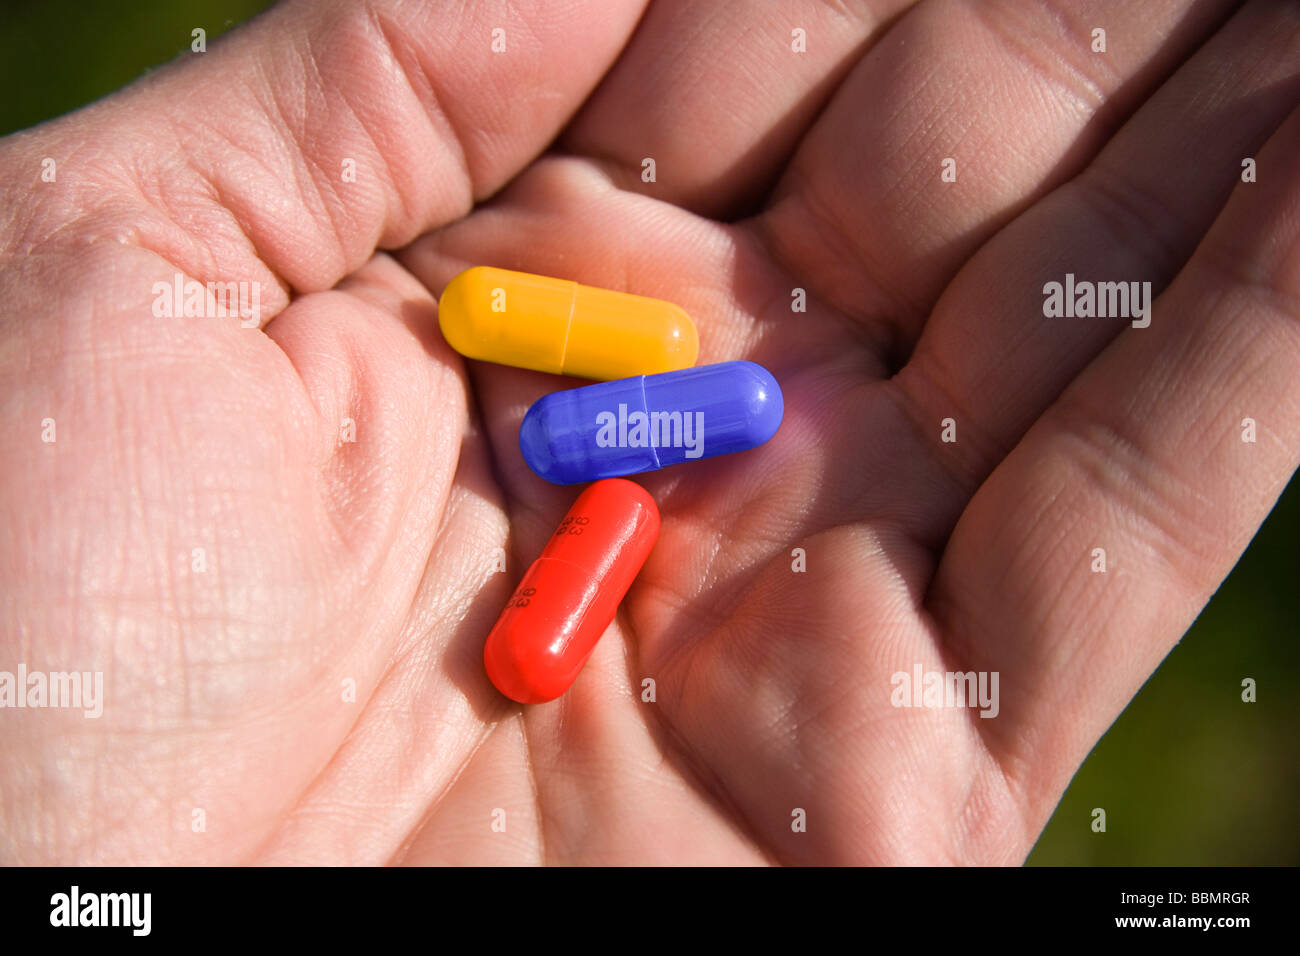 Three colourful medicine capsules in the palm of a hand Stock Photo